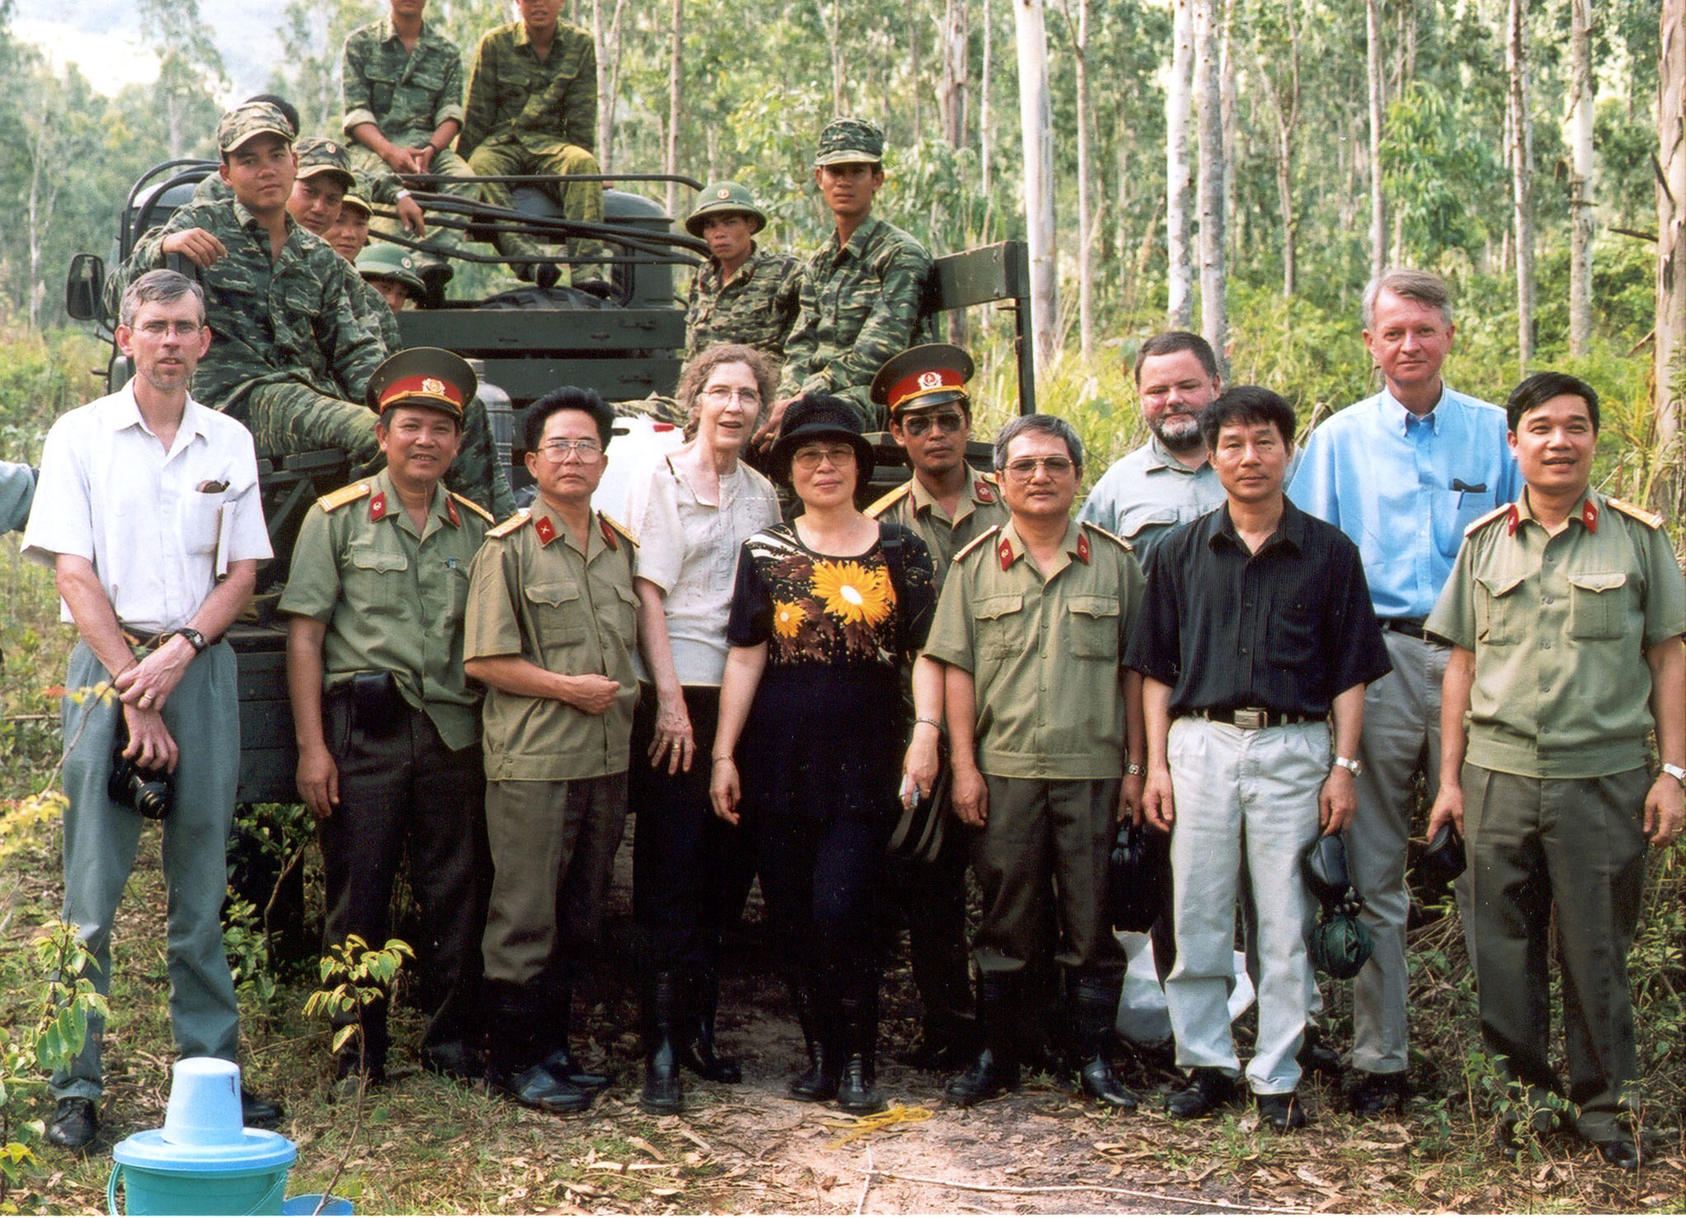 Chuck Searcy (second from right), Lady Borton (center, with her Vietnamese colleague Le Hoai Phuong), and Grant Bruce of Hatfield Consultants (far left) in 2001, at an army base in Quy Nhon. (Photo courtesy of George Black)